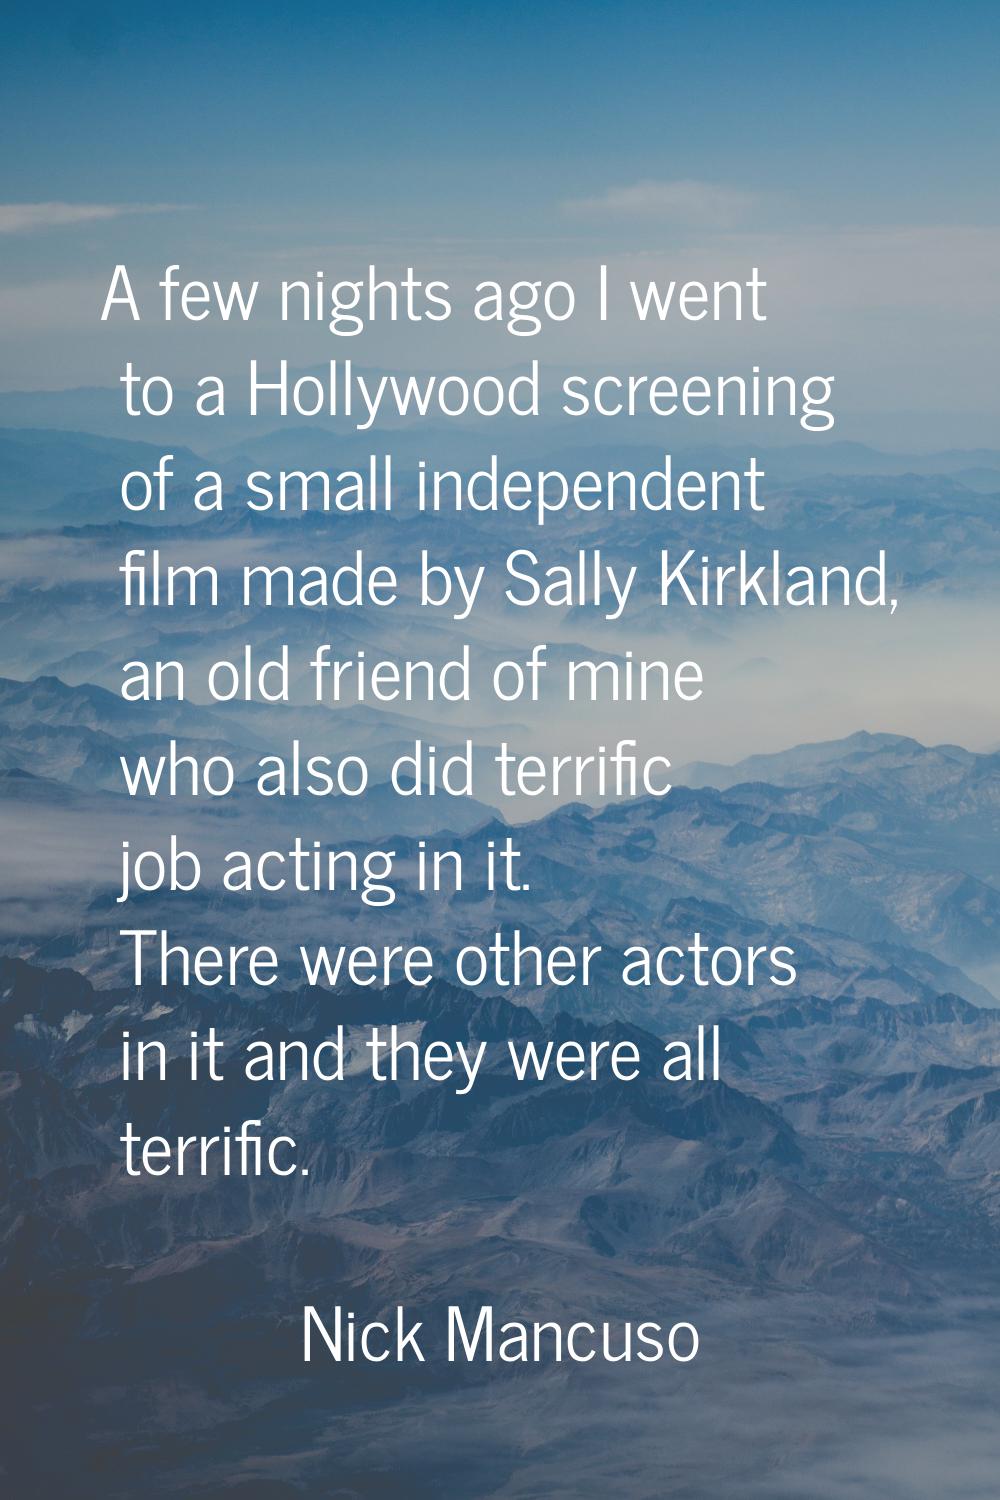 A few nights ago I went to a Hollywood screening of a small independent film made by Sally Kirkland